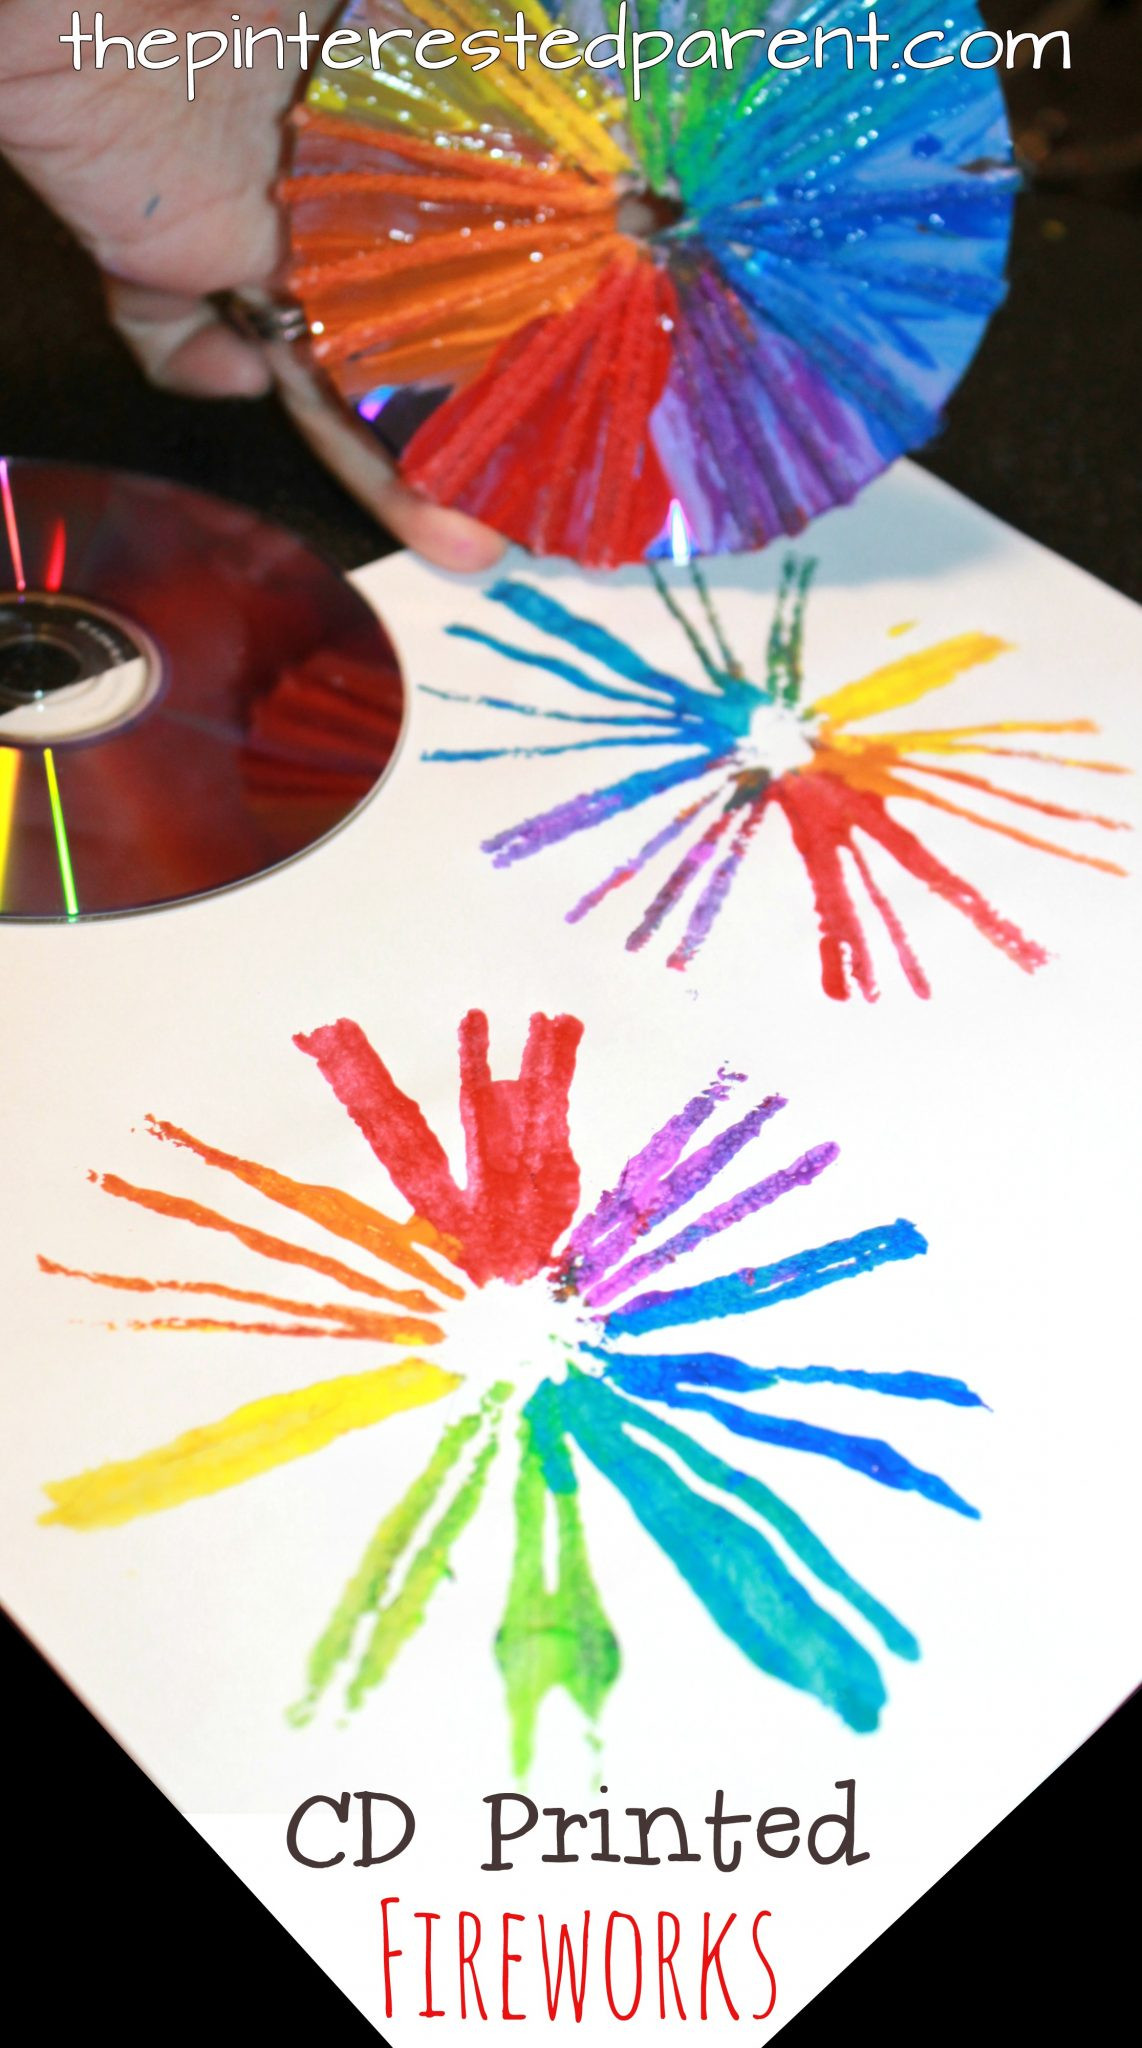 Preschoolers Arts And Crafts Ideas
 Printmaking With Cds For Kids – The Pinterested Parent